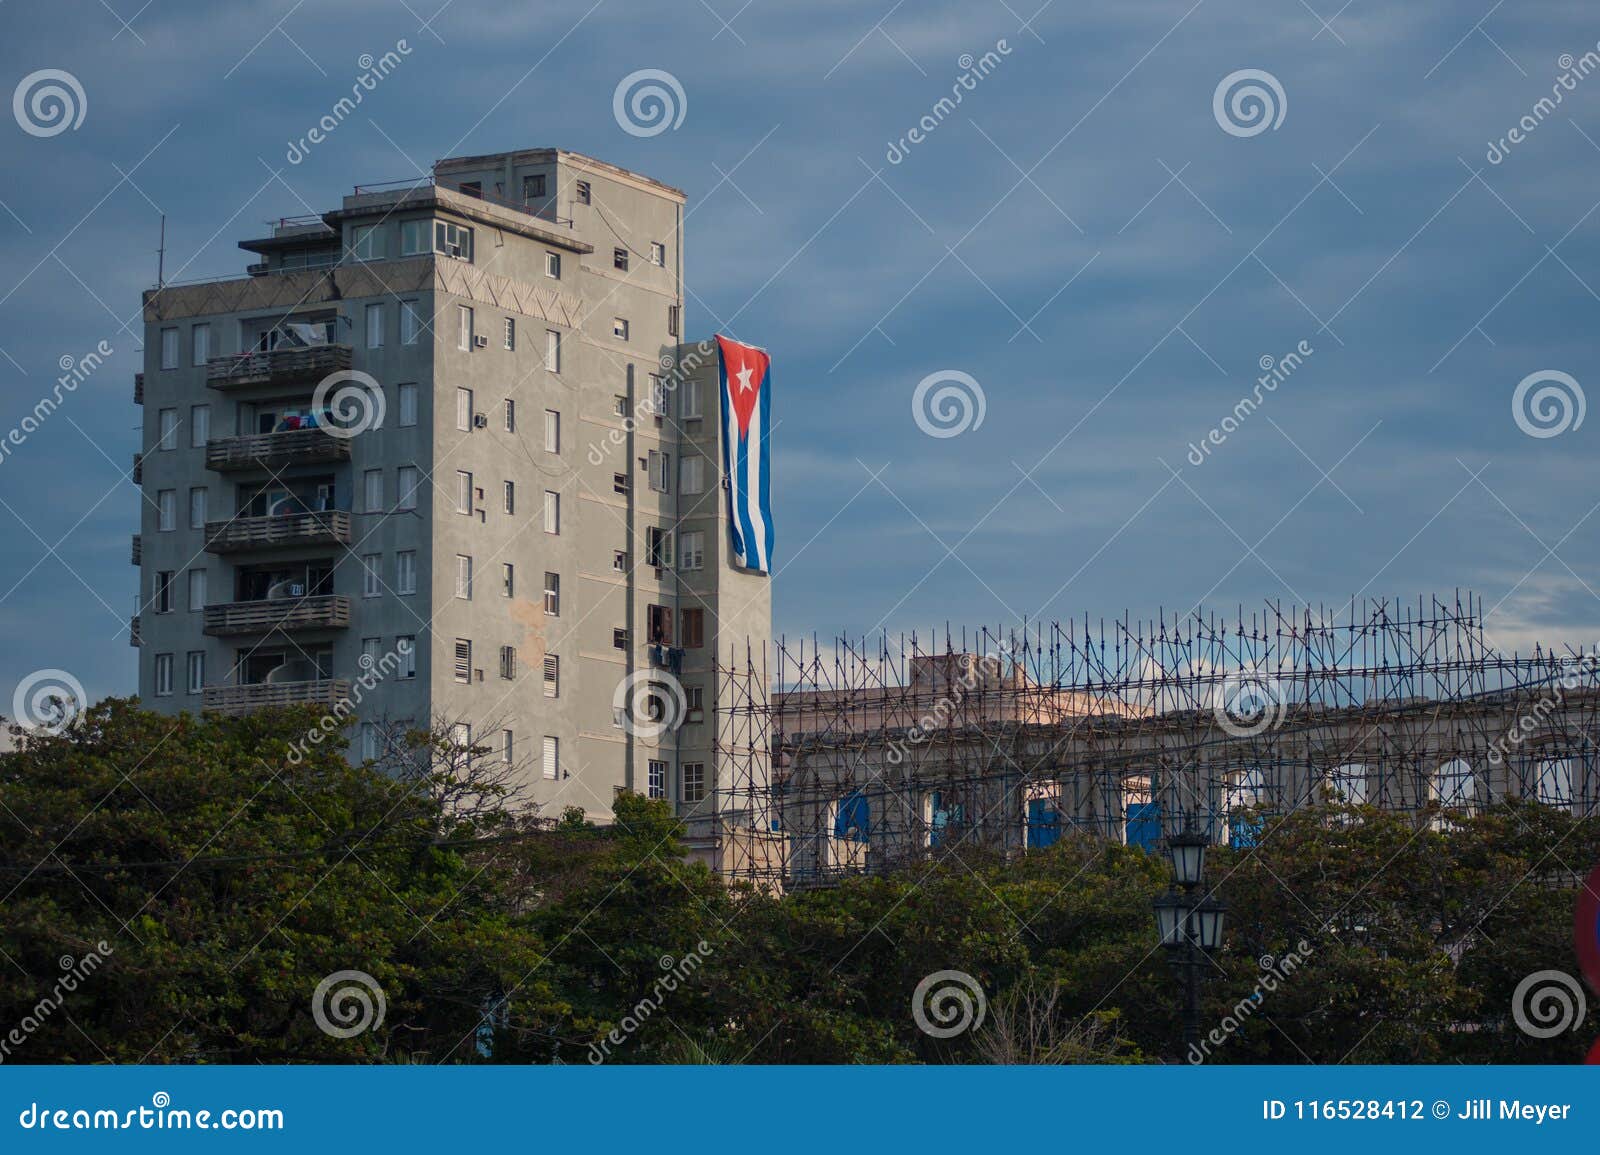 cuban flag hanging on a building